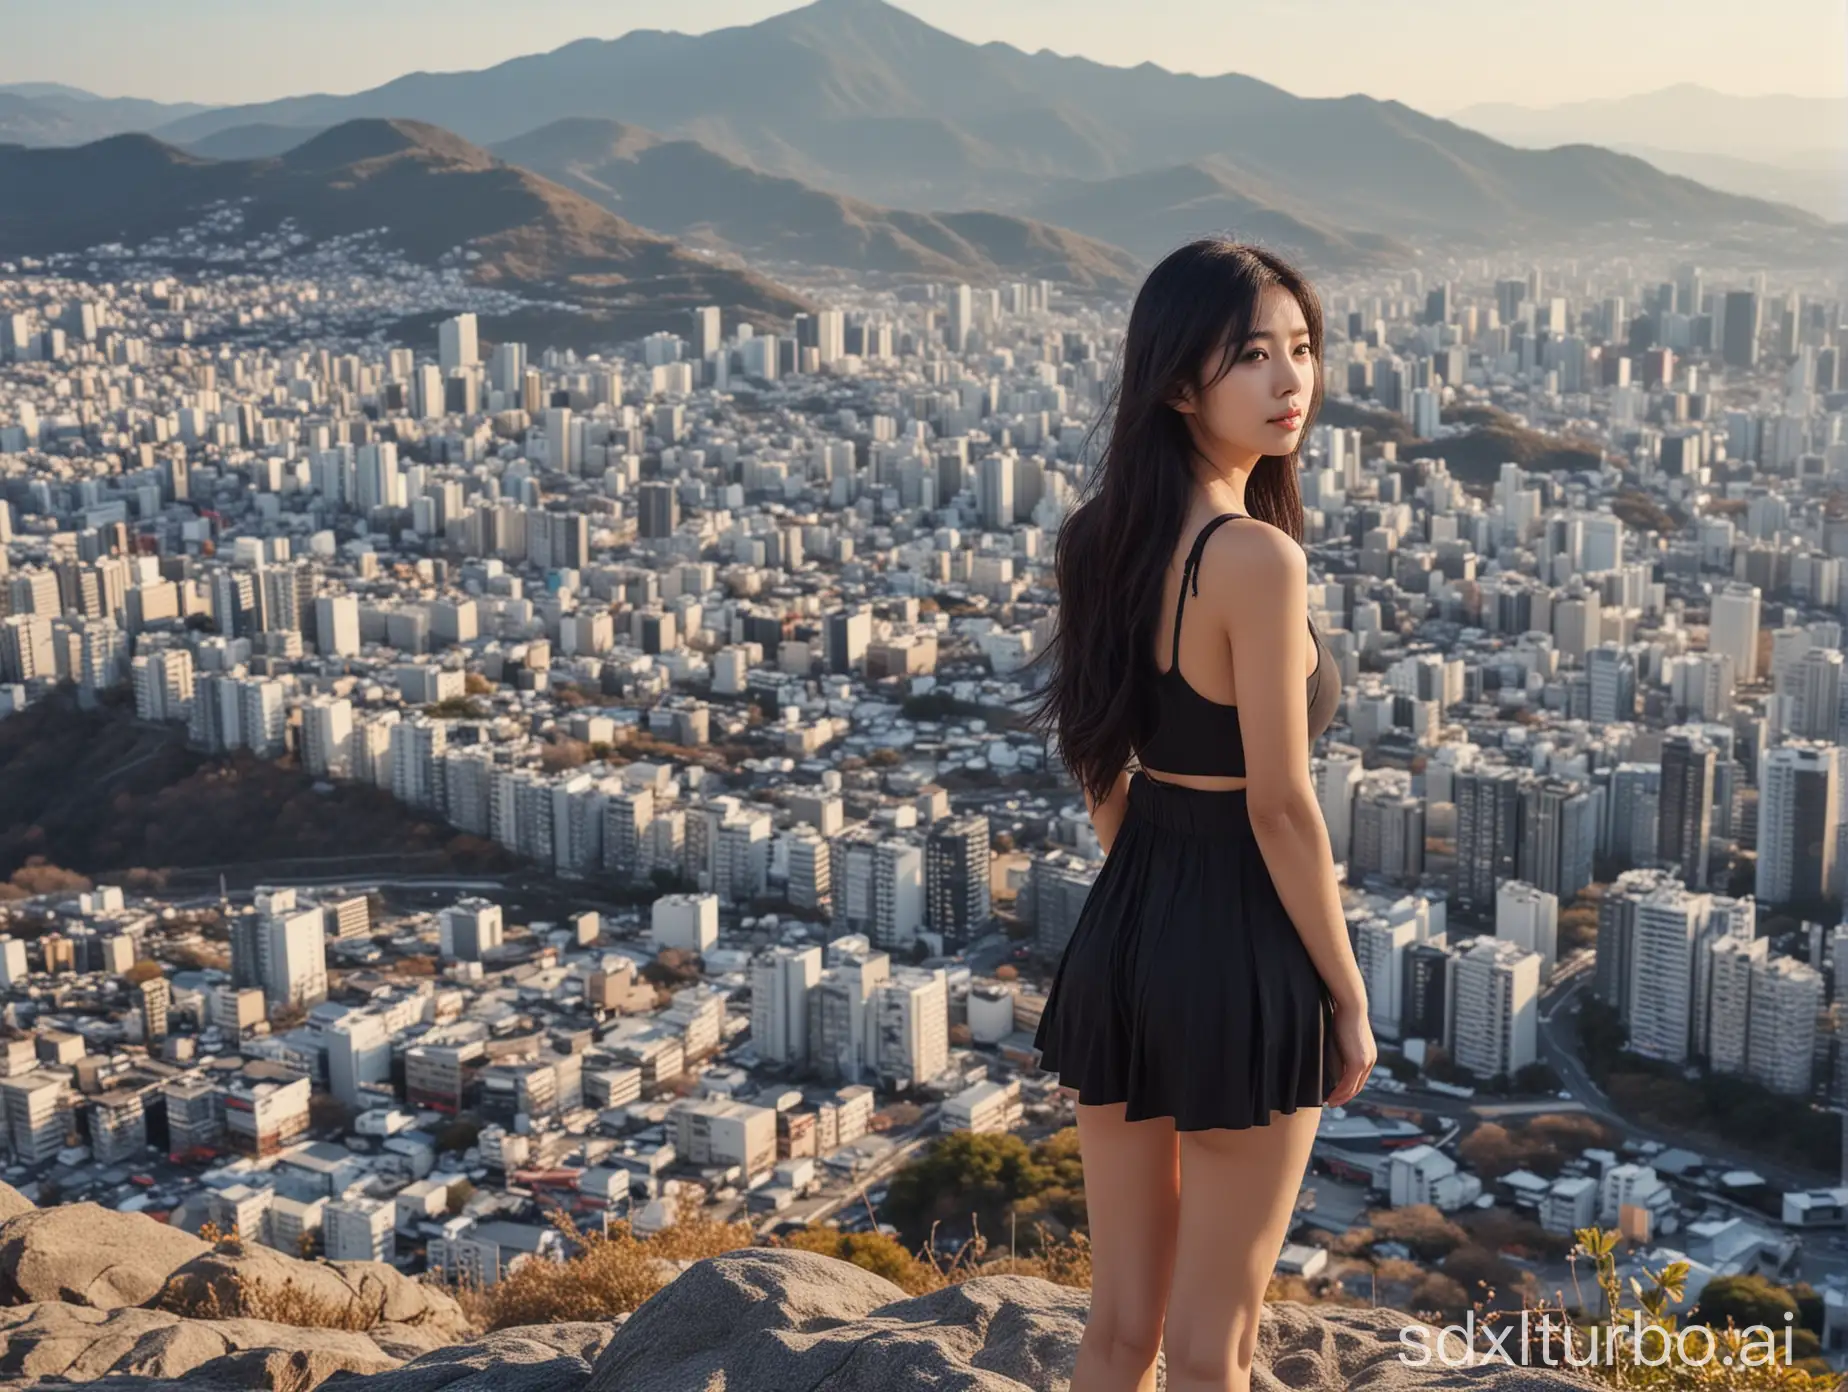 Japanese-Woman-Enjoying-Panoramic-View-from-Mountain-Top-in-Cityscape